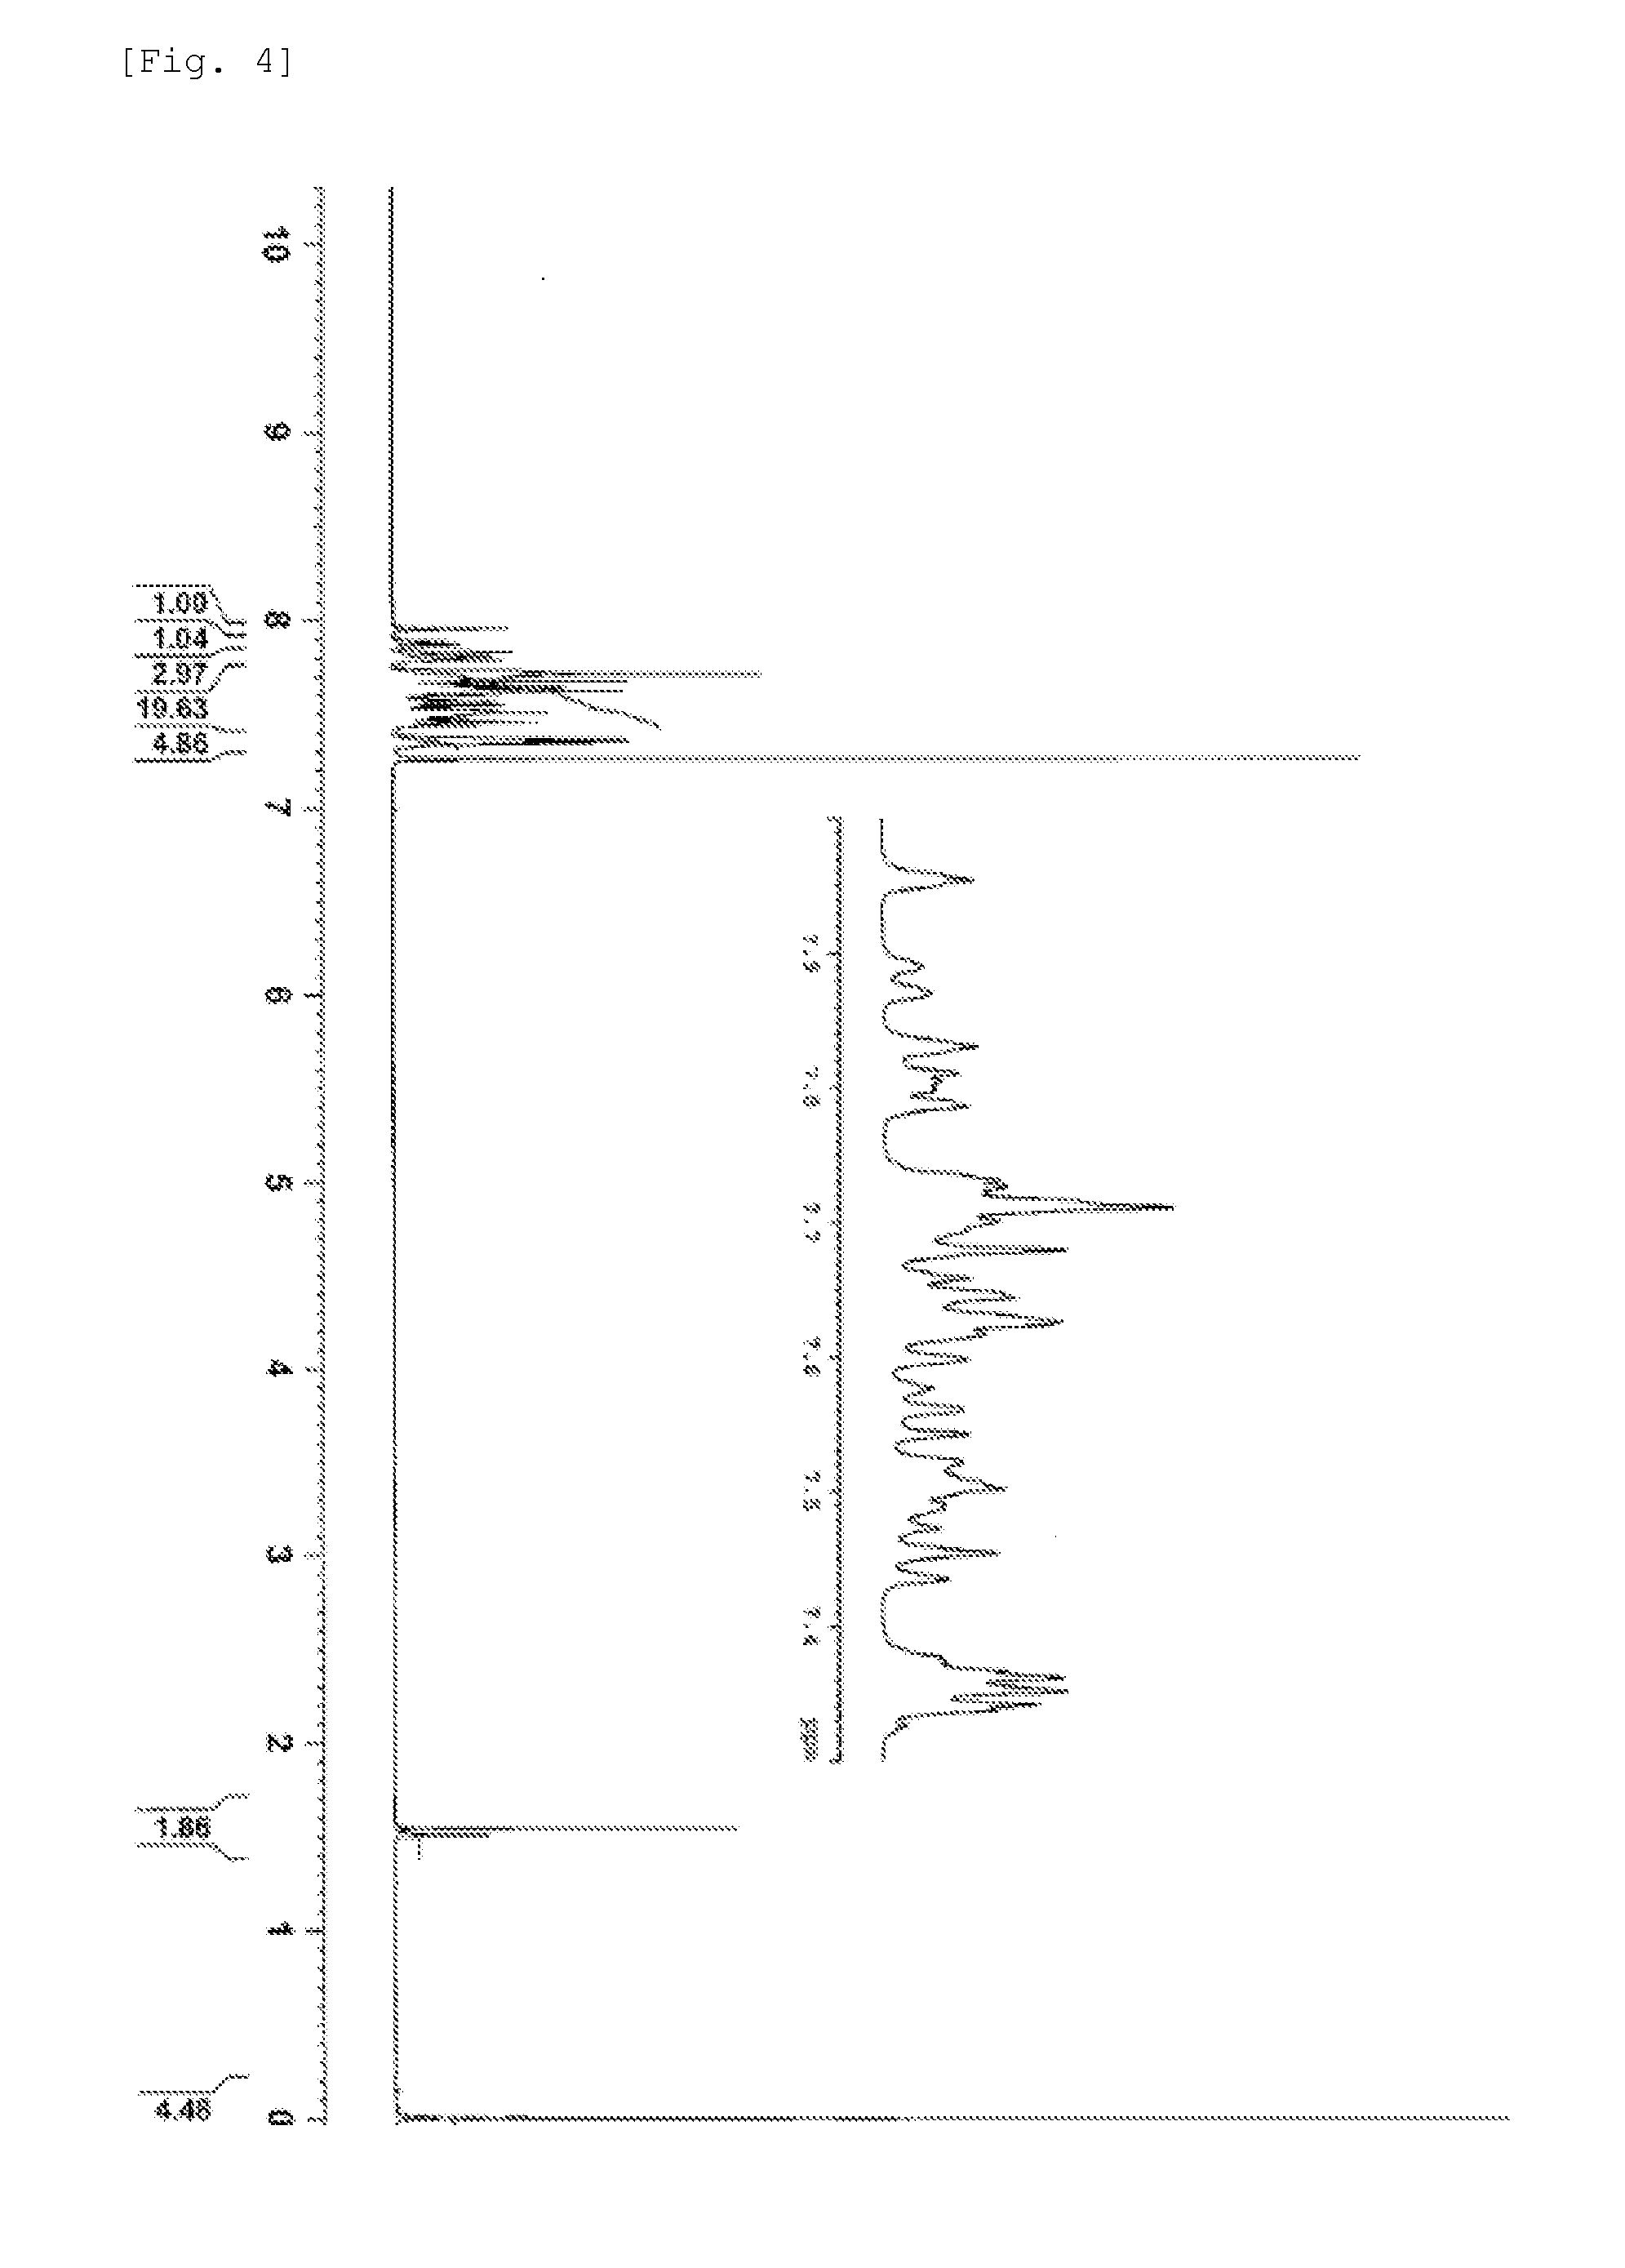 Organic electroluminescent element, compounds and materials used for the organic electroluminescent element, and light-emitting, display and illuminating devices using the elements